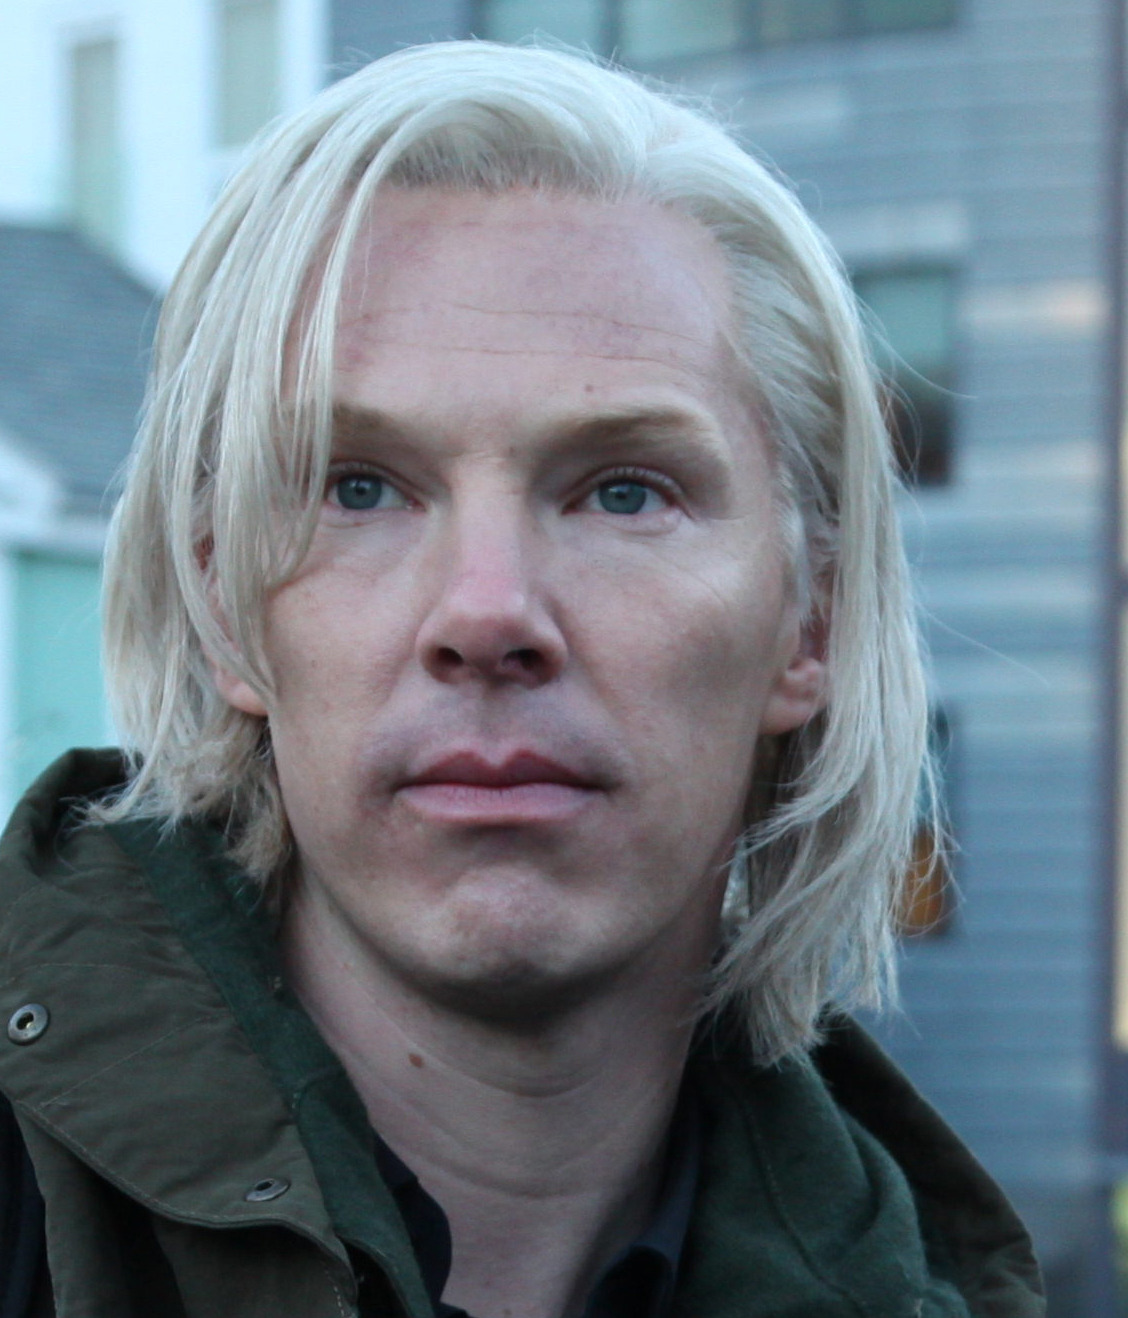 dudeufugly:

first look: Benedict Cumberbatch in The Fifth Estate
(x)

Jokes aside, it&#8217;s a FUCKING GOOD wig though.
You know it&#8217;s gunna be awesome when the subject looks NOTHING like the real actor but resembles who he&#8217;s playing really well. Looking forward to this movie!